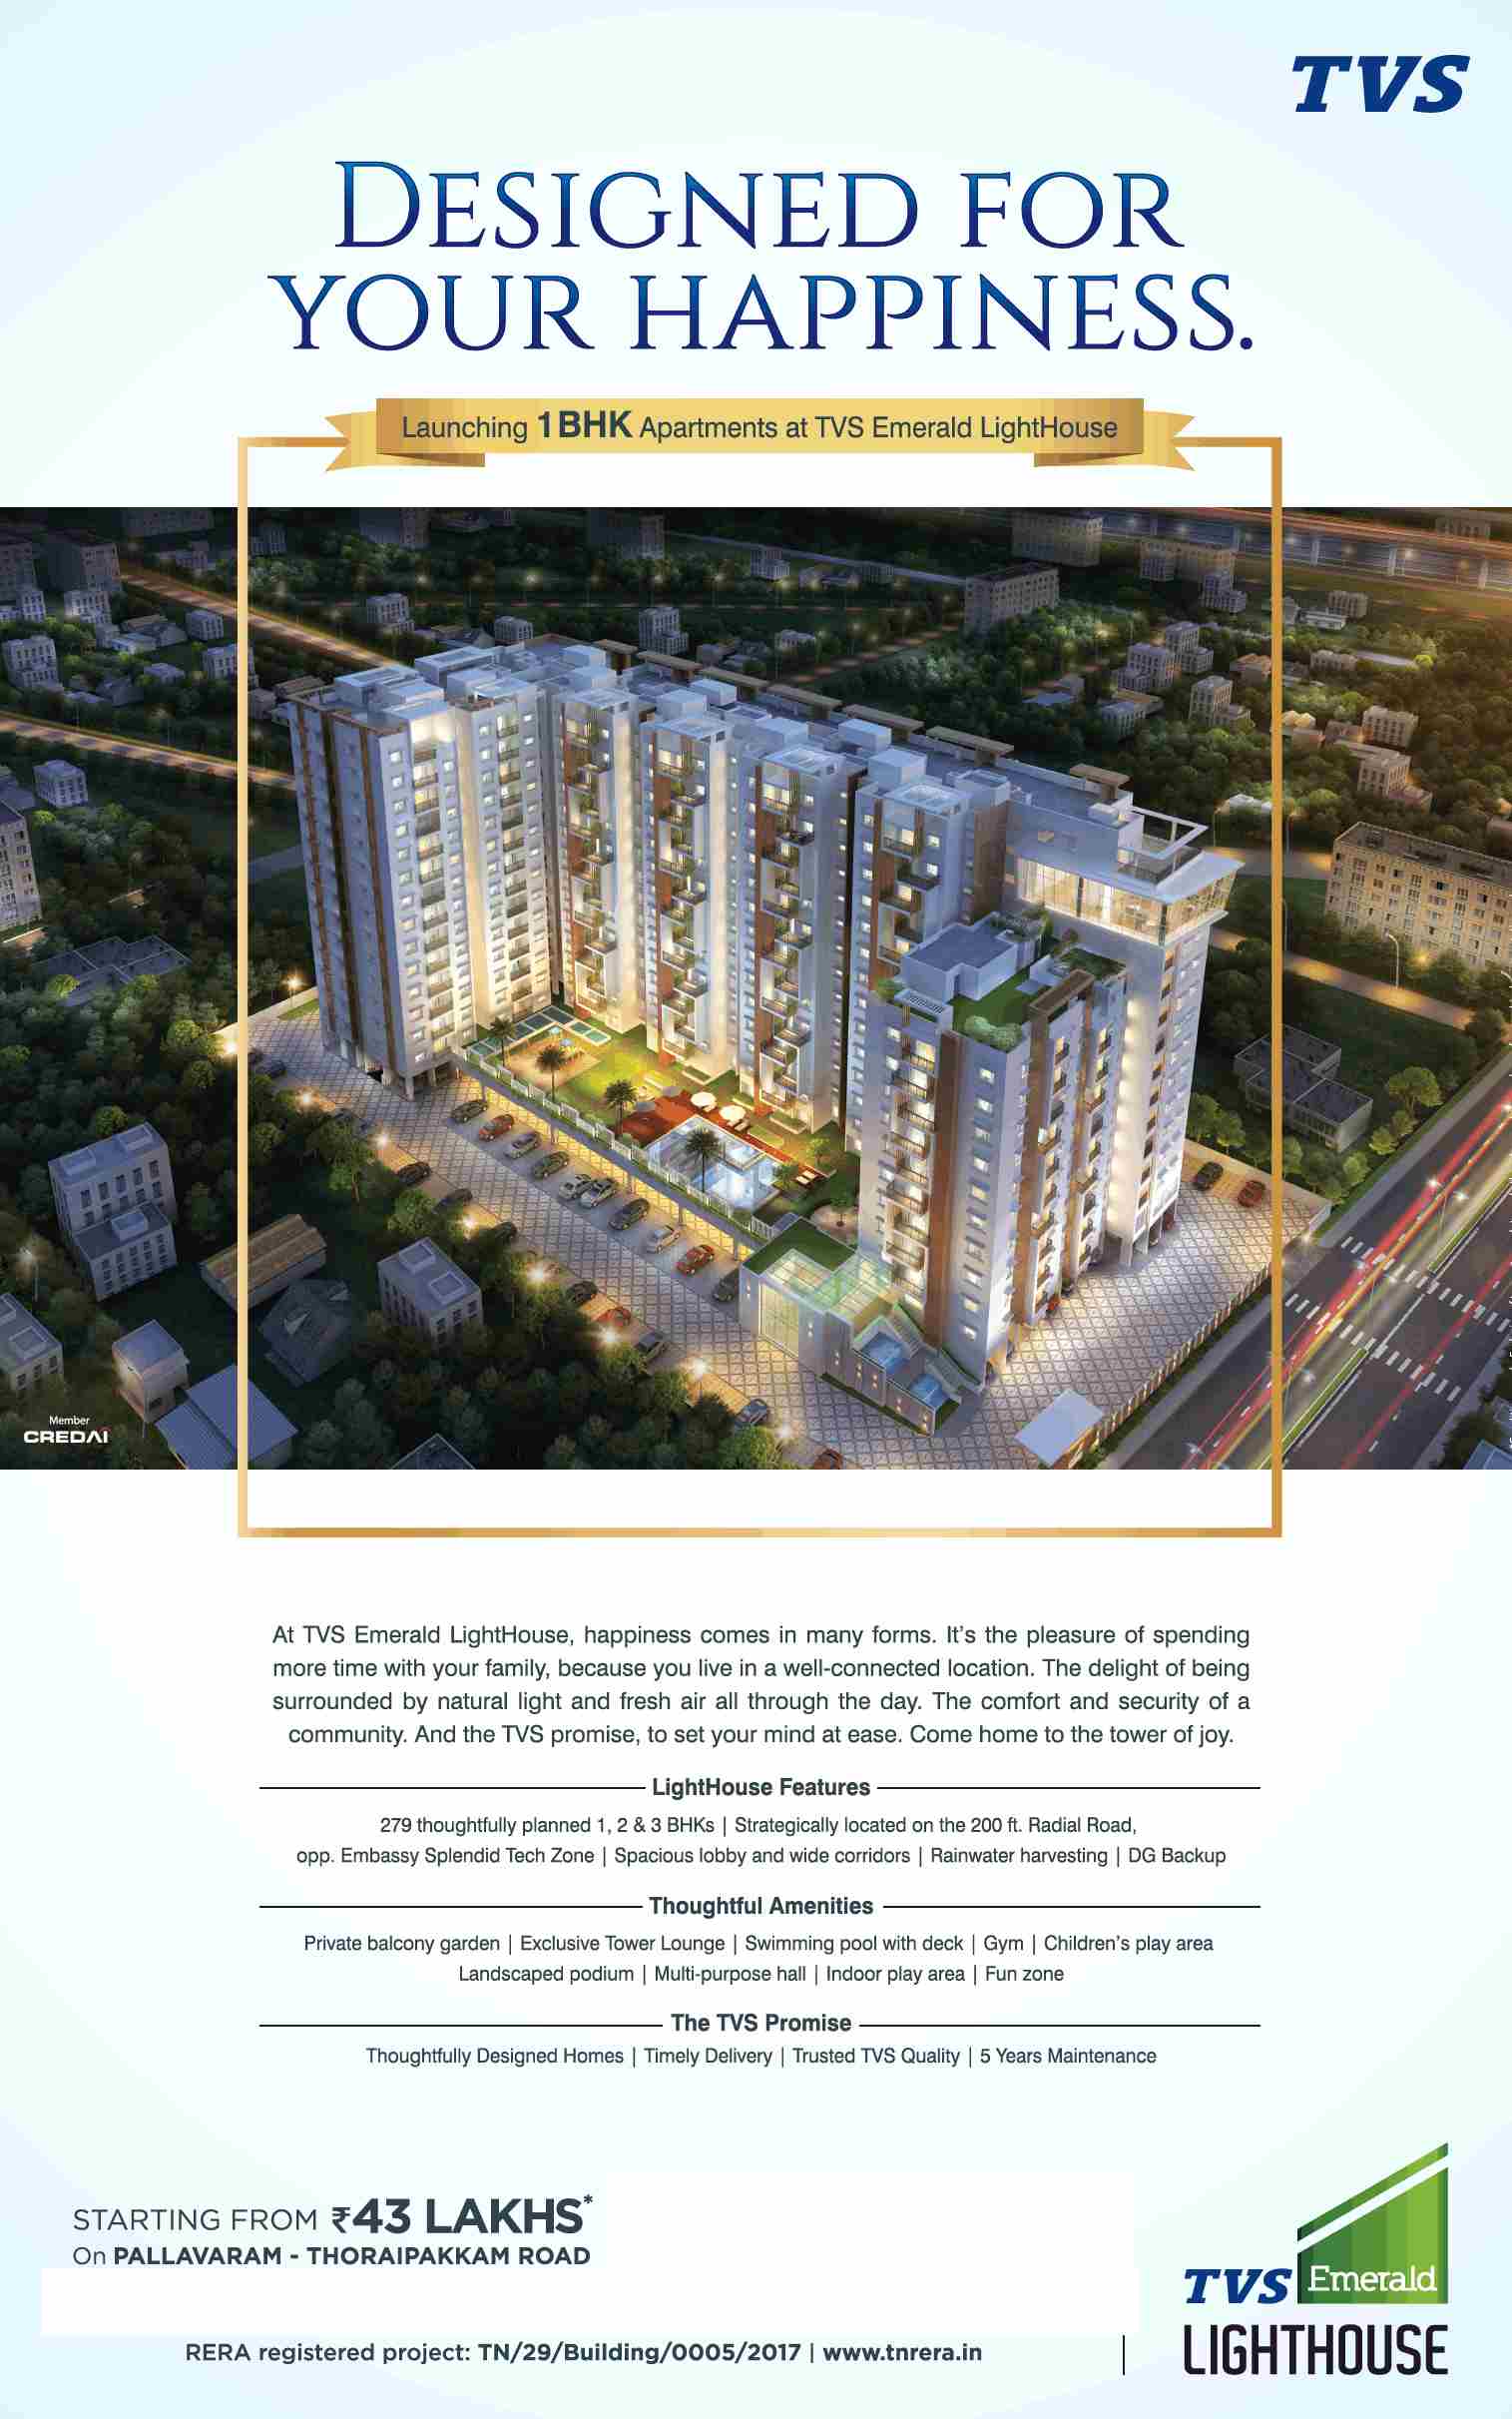 Book 1 BHK @ Rs 43 Lakhs at TVS Emerald LightHouse in Chennai Update